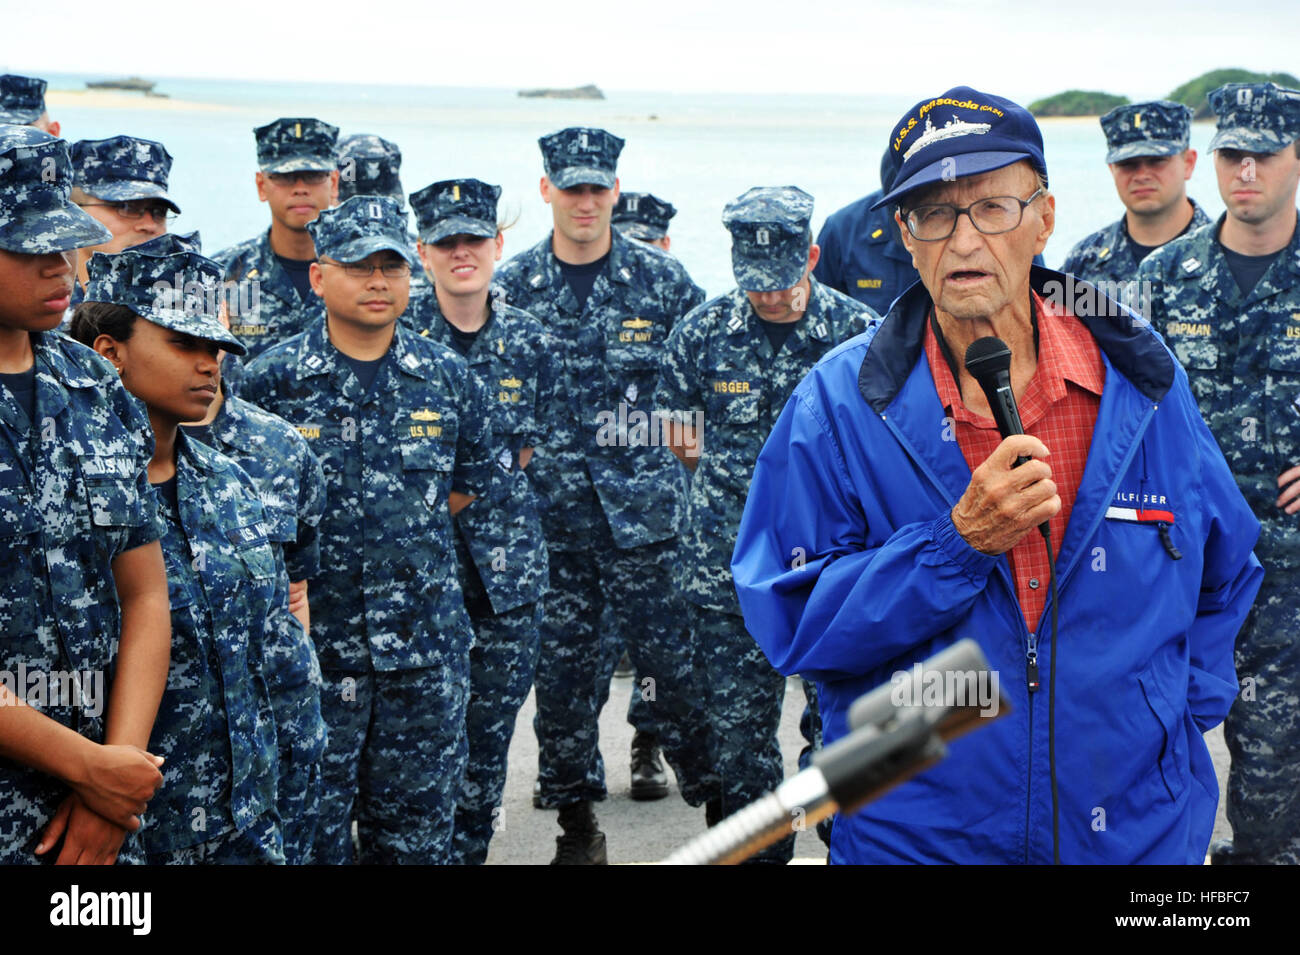 120601-N-TG831-109 OKINAWA, Japan (June 1, 2012) Wayne Heyart, a former enlisted Radioman 1st class petty officer and World War II veteran, speaks about his experiences in the Navy to the crew of the Arleigh Burke-class guided-missile destroyer USS McCampbell (DDG 85) during a tour of the ship. McCampbell is forward deployed to Yokosuka, Japan and is underway in the U.S. 7th Fleet area of operations. (U.S. Navy photo by Mass Communication Specialist Seaman Declan Barnes/Released)  - Official U.S. Navy Imagery - A former enlisted Radioman 1st class petty officer and World War II veteran, speaks Stock Photo